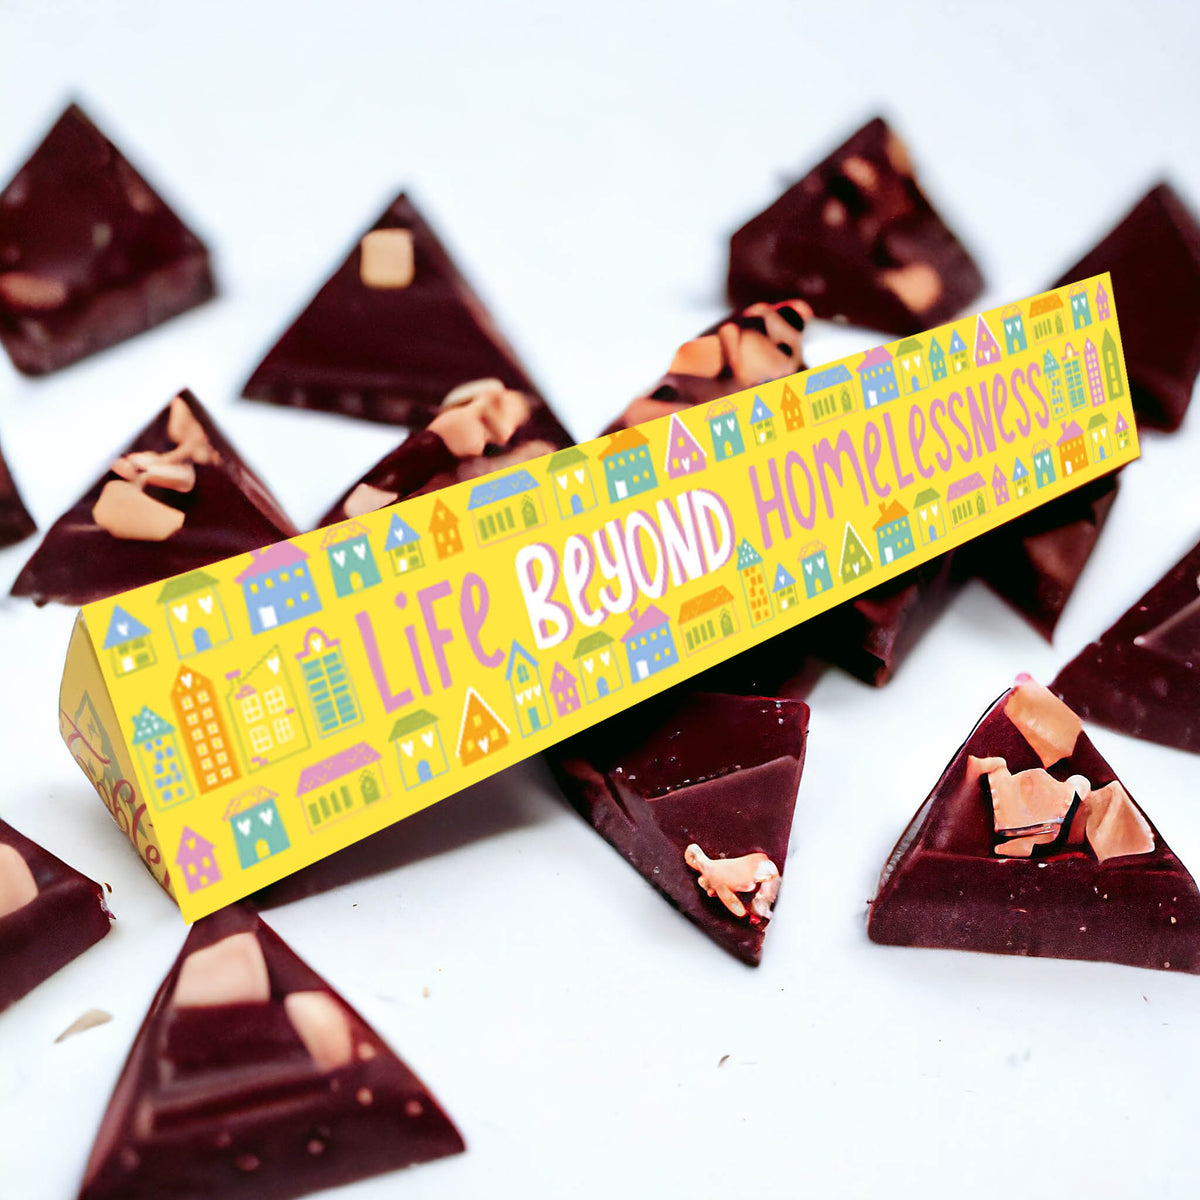 Crisis Toblerone - Exclusive "Life beyond homelessness"  Spring Design